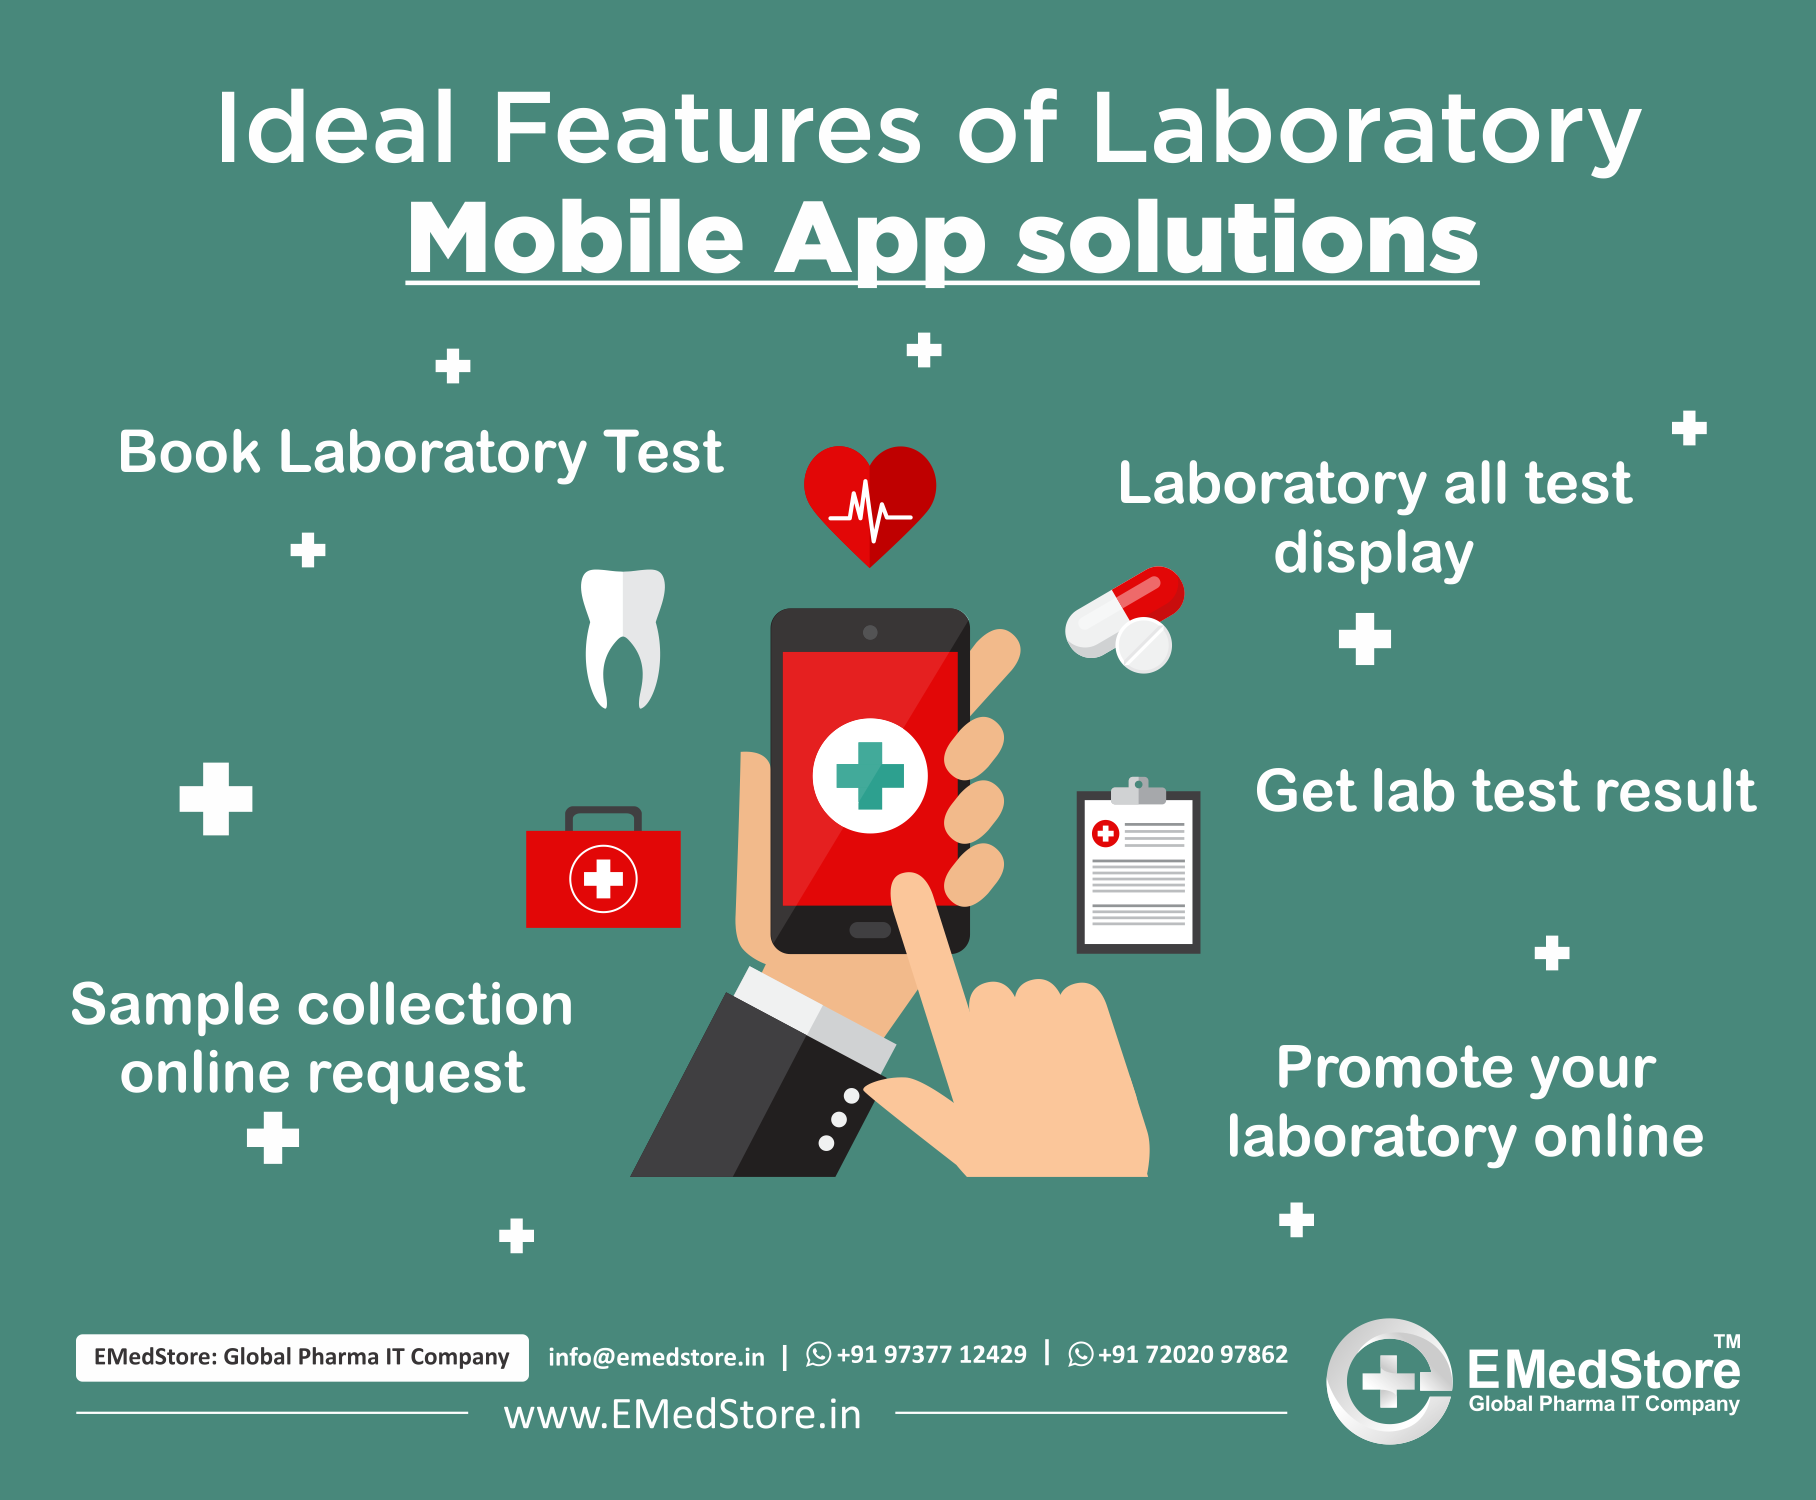 Ideal Features of Laboratory Mobile App solutions